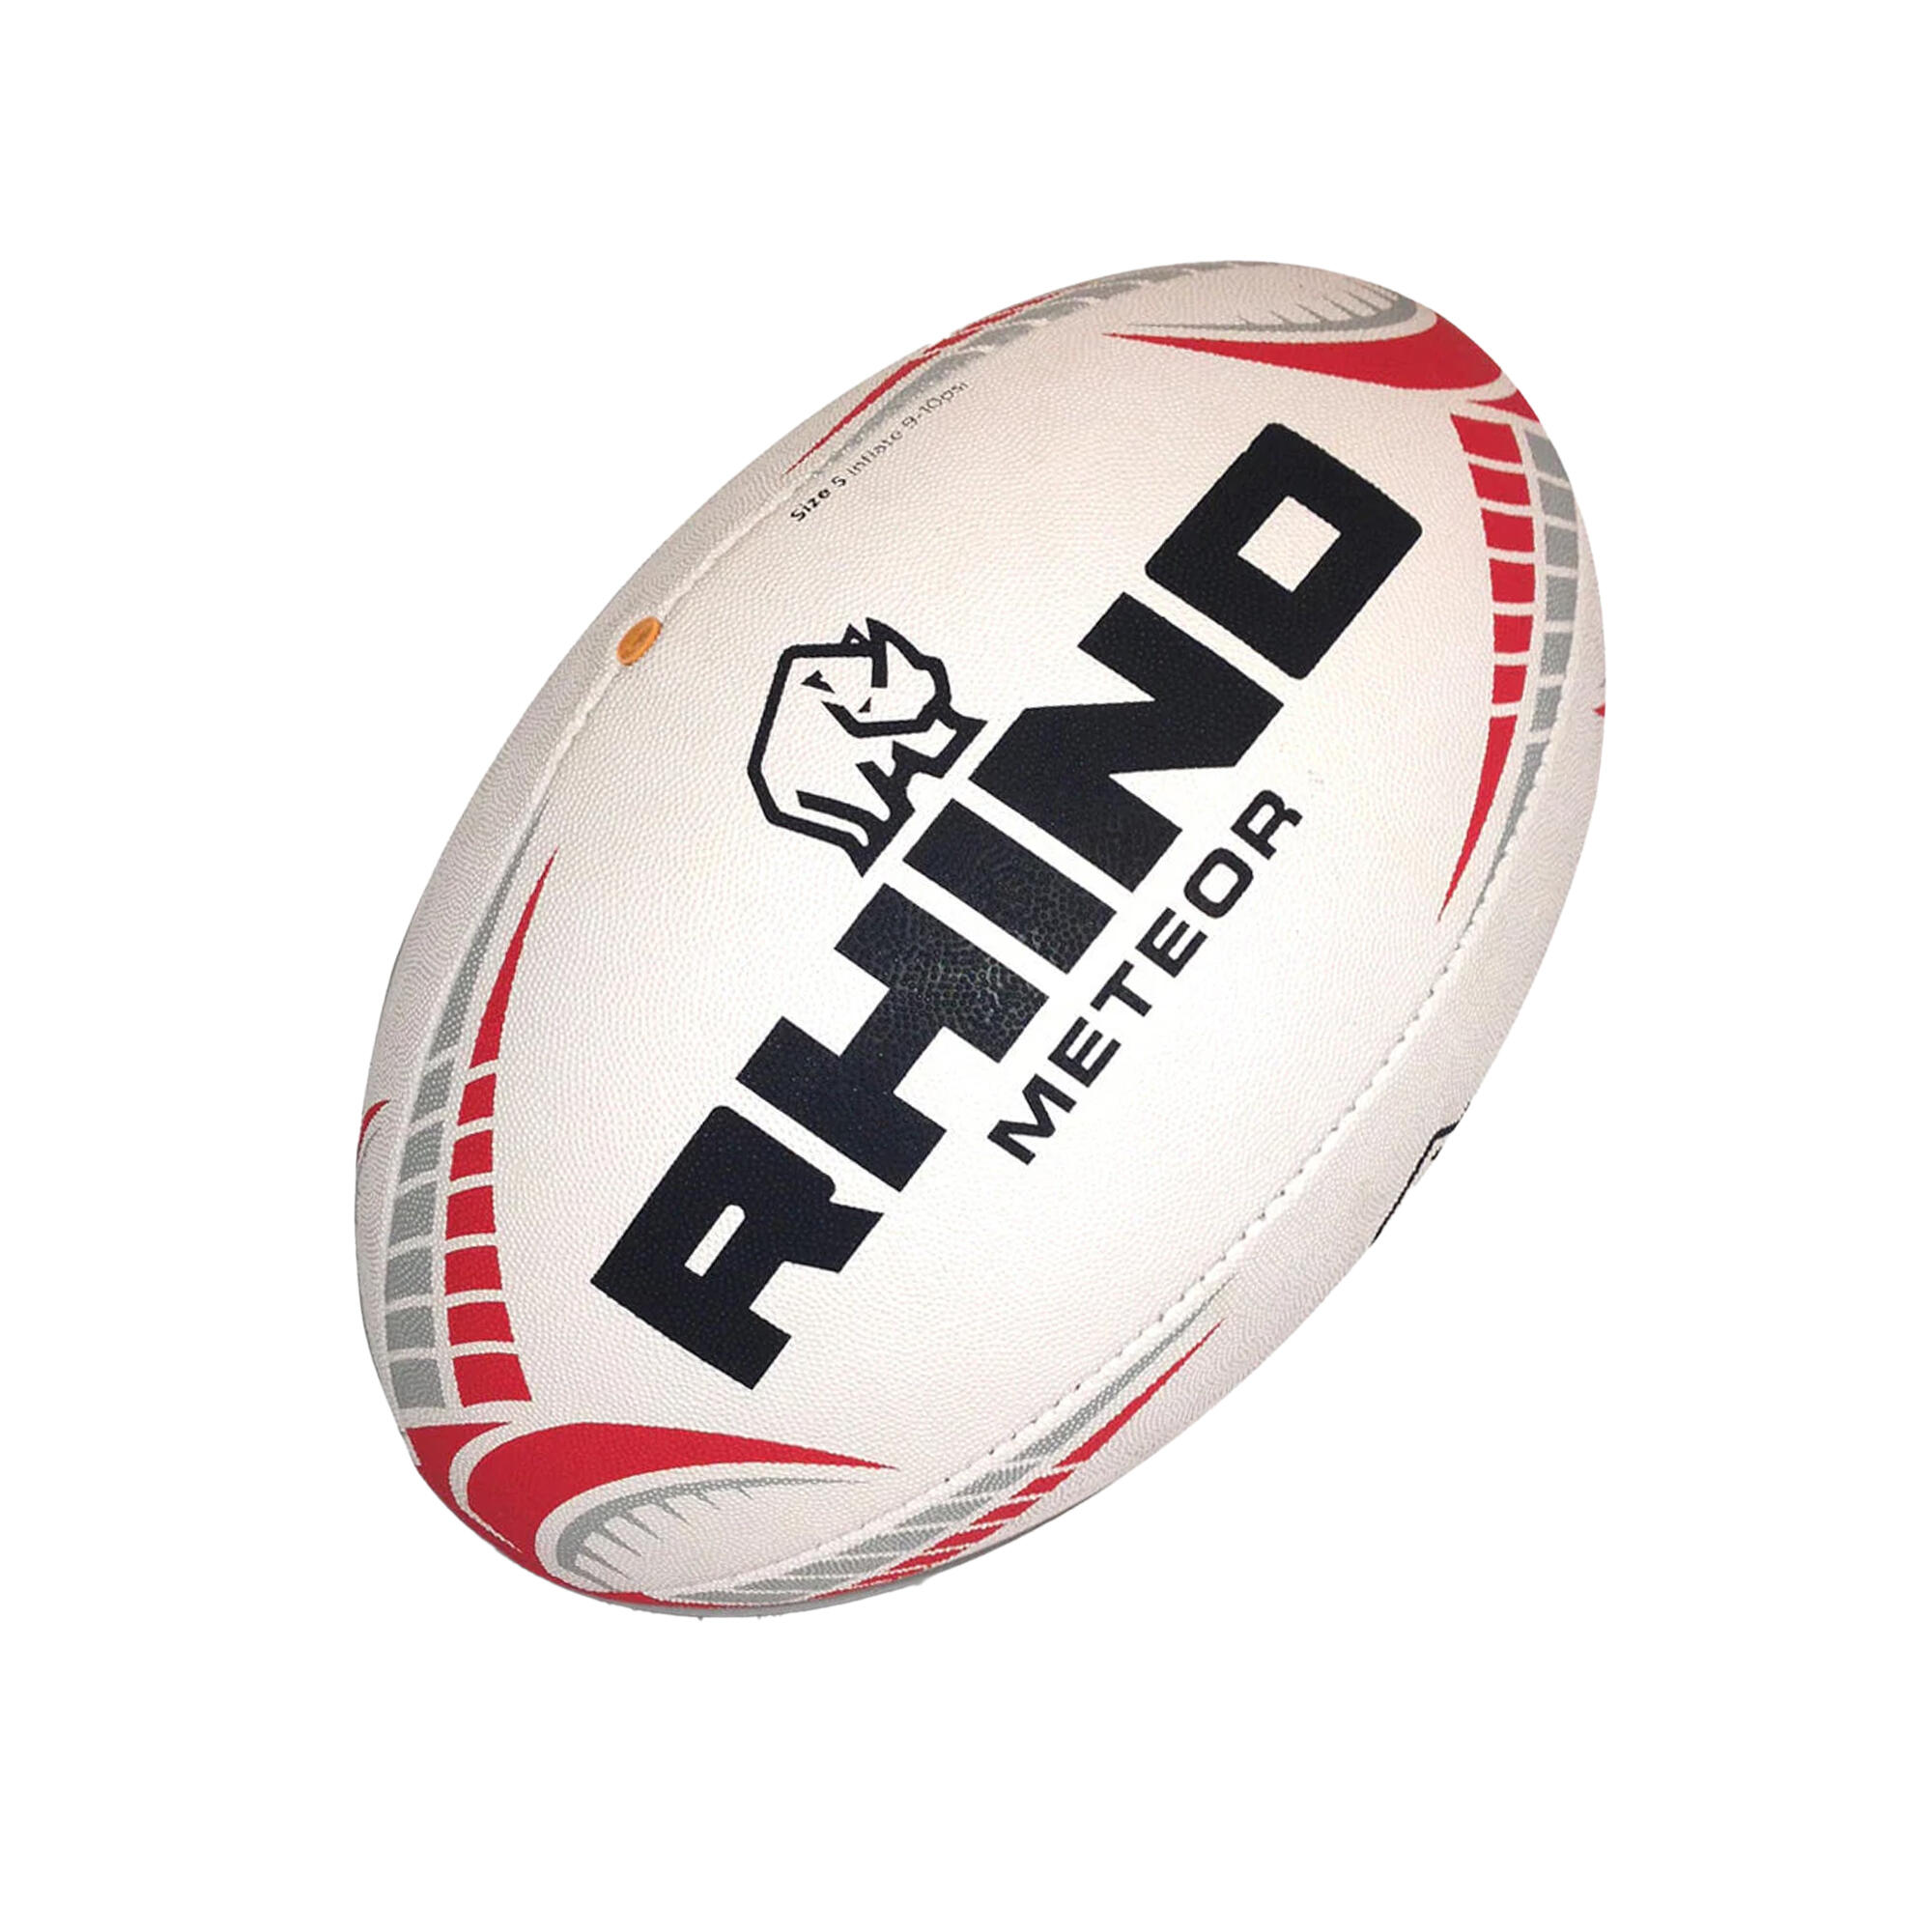 Meteor Rugby Ball (Black/White/Red) 2/3